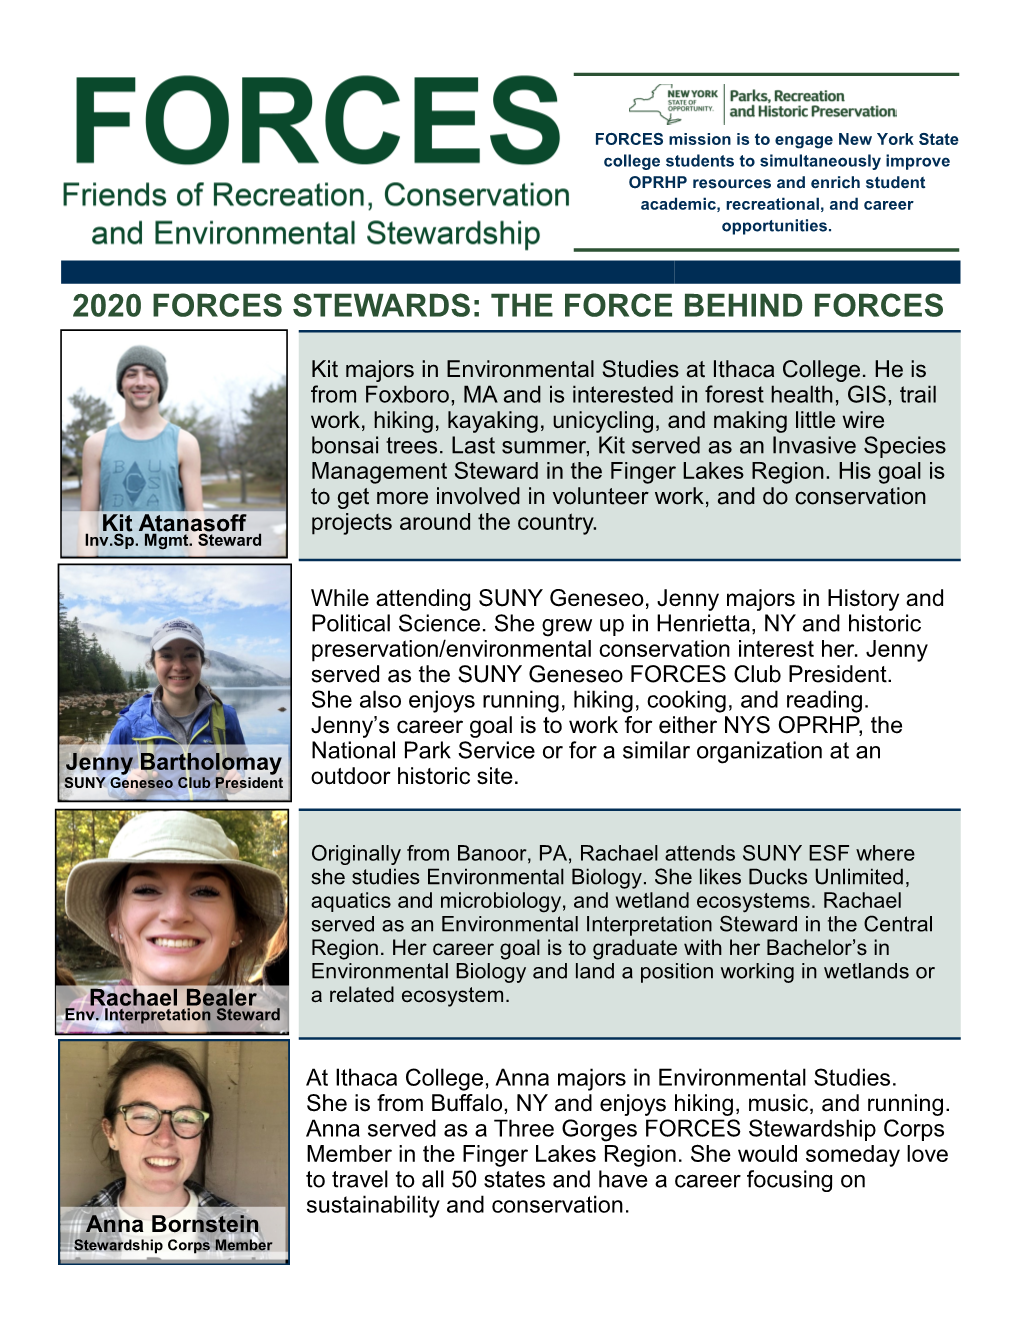 2020 Forces Stewards: the Force Behind Forces